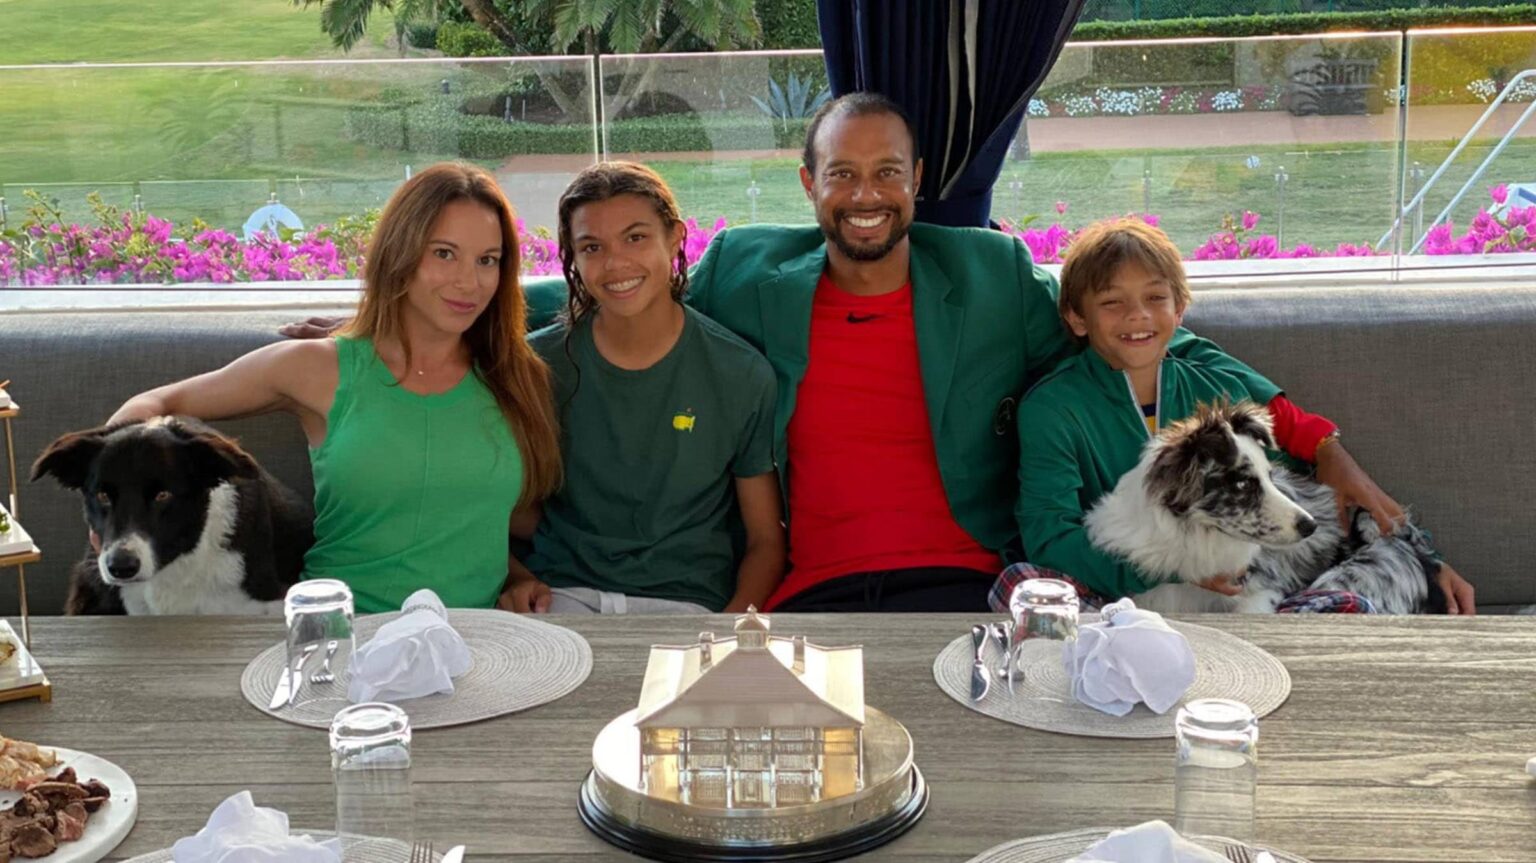 With golfing legend Tiger Woods as your father, it's no surprise his kids like the sport too. Check out the family getting some tee time together.